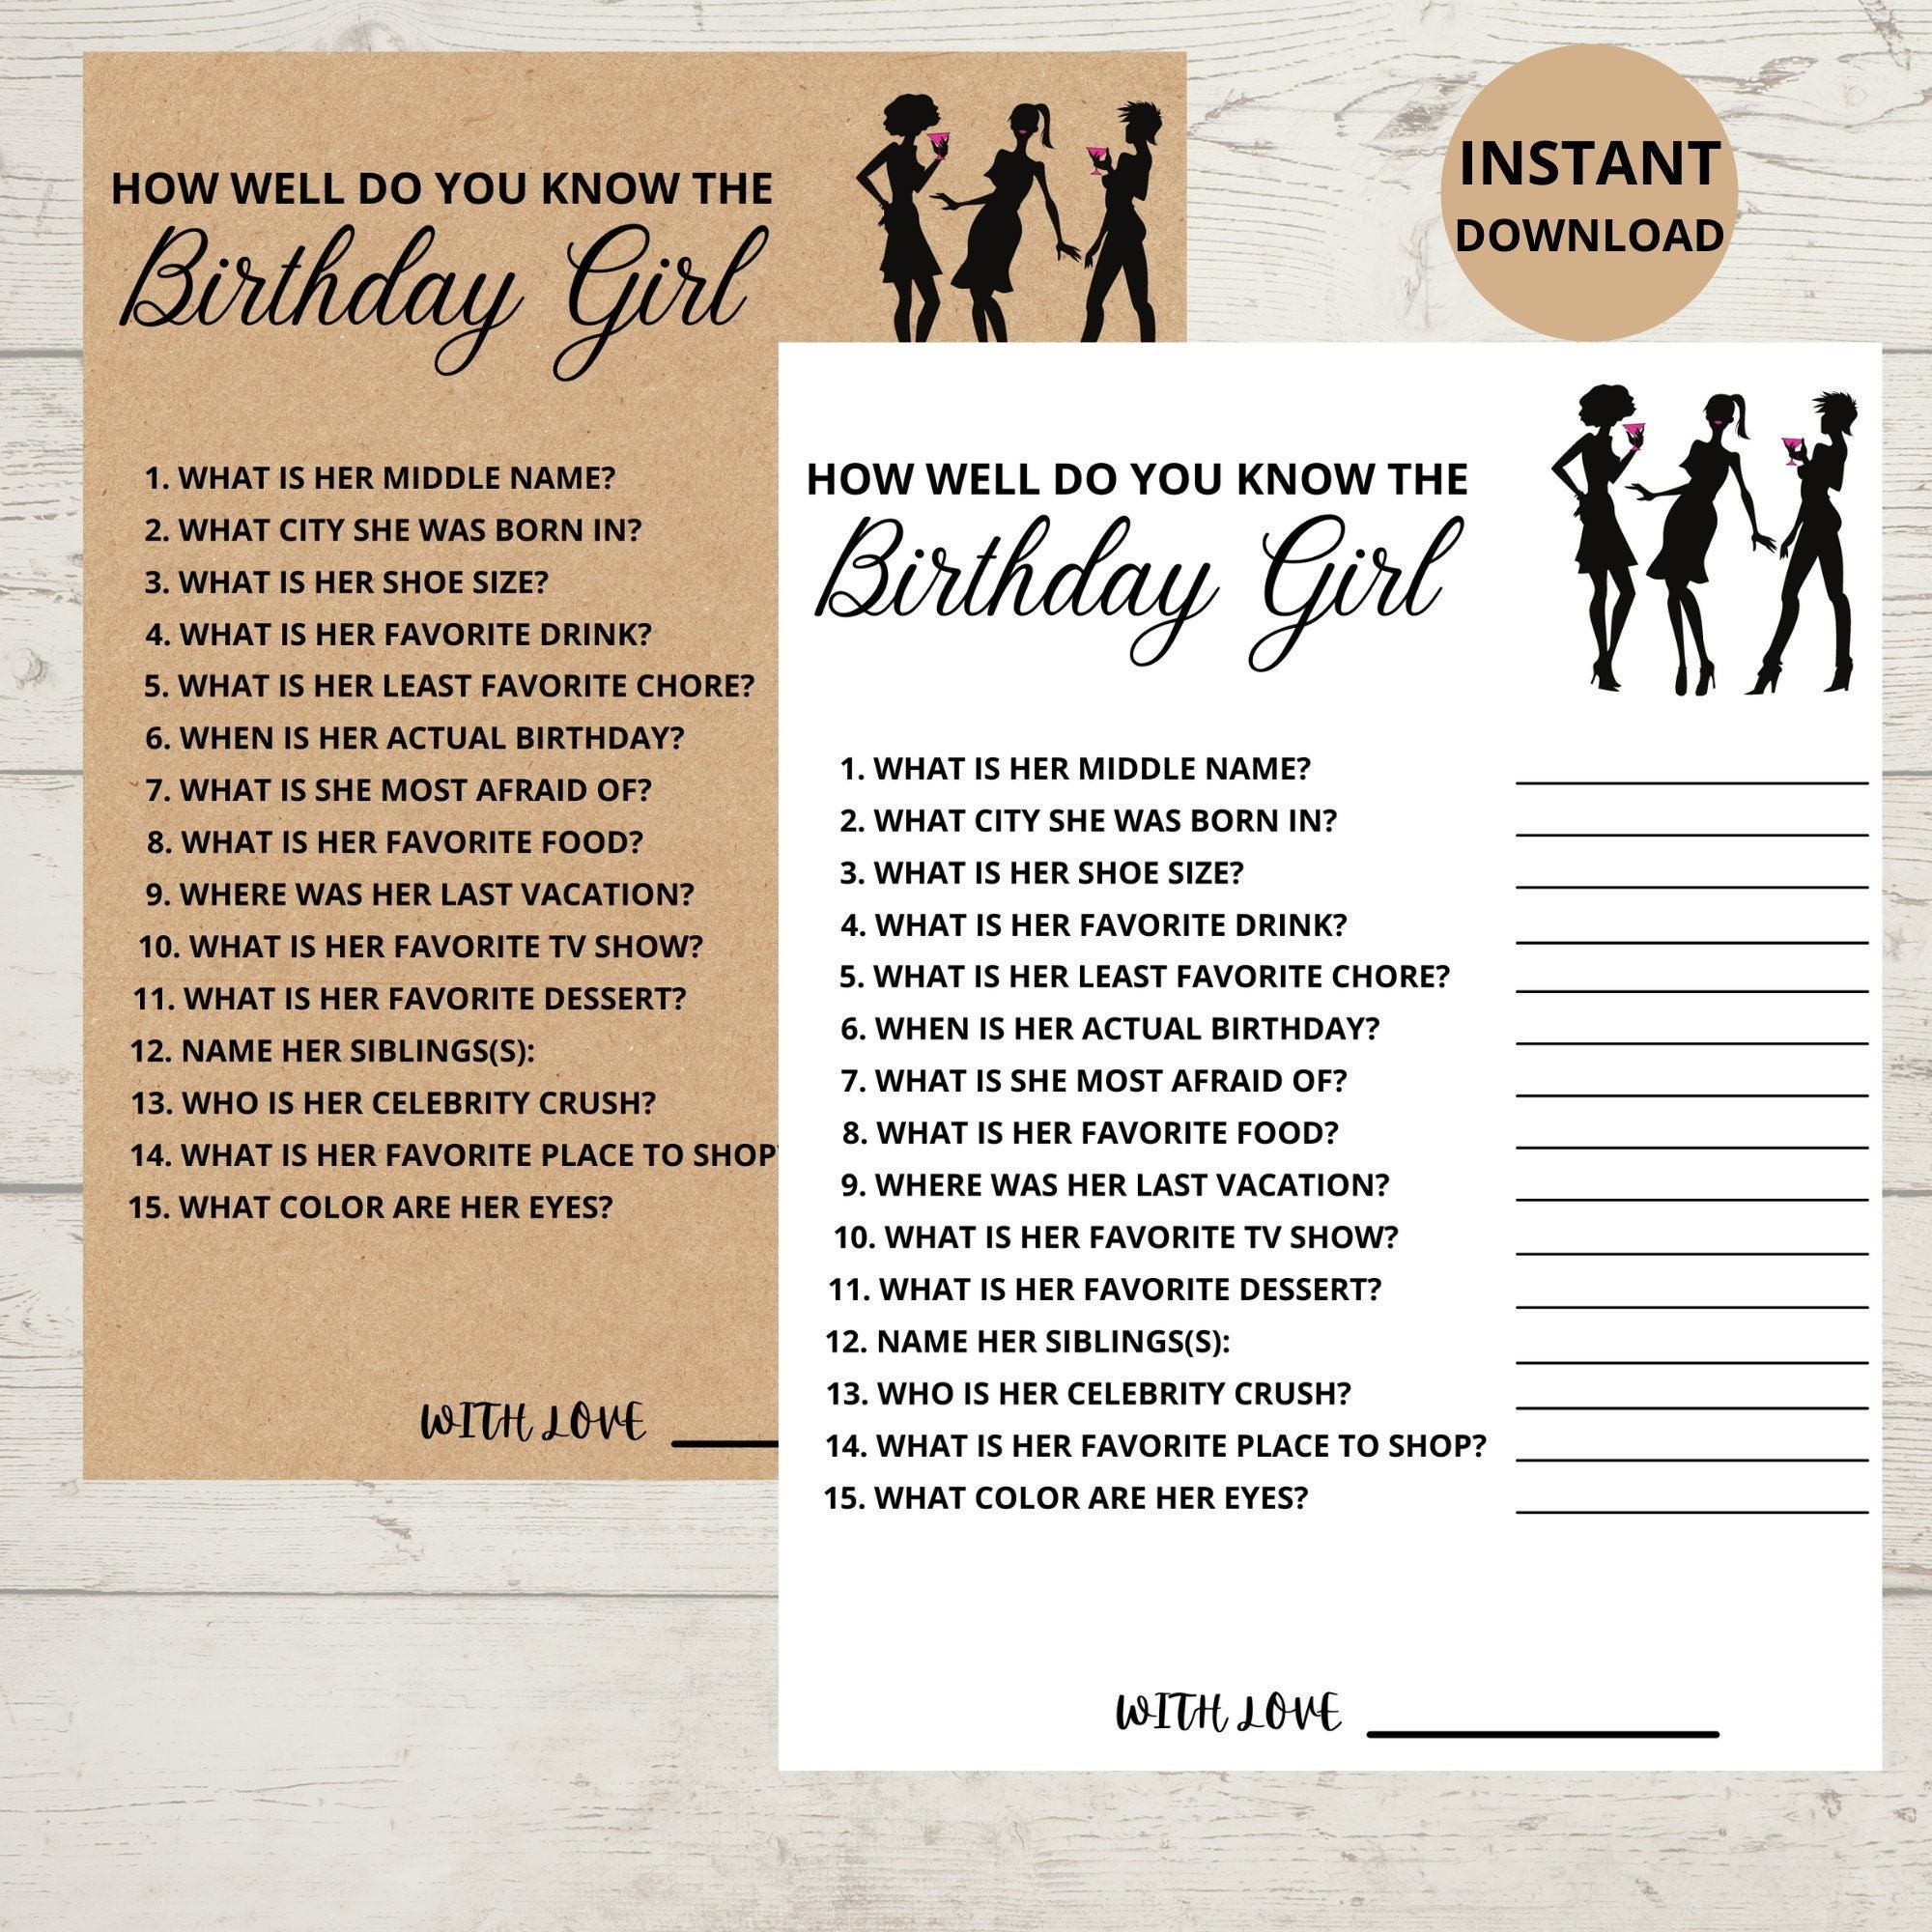 How Well Do You Know The Birthday Girl Who Knows The Birthday Girl Best Adult Birthday Party 